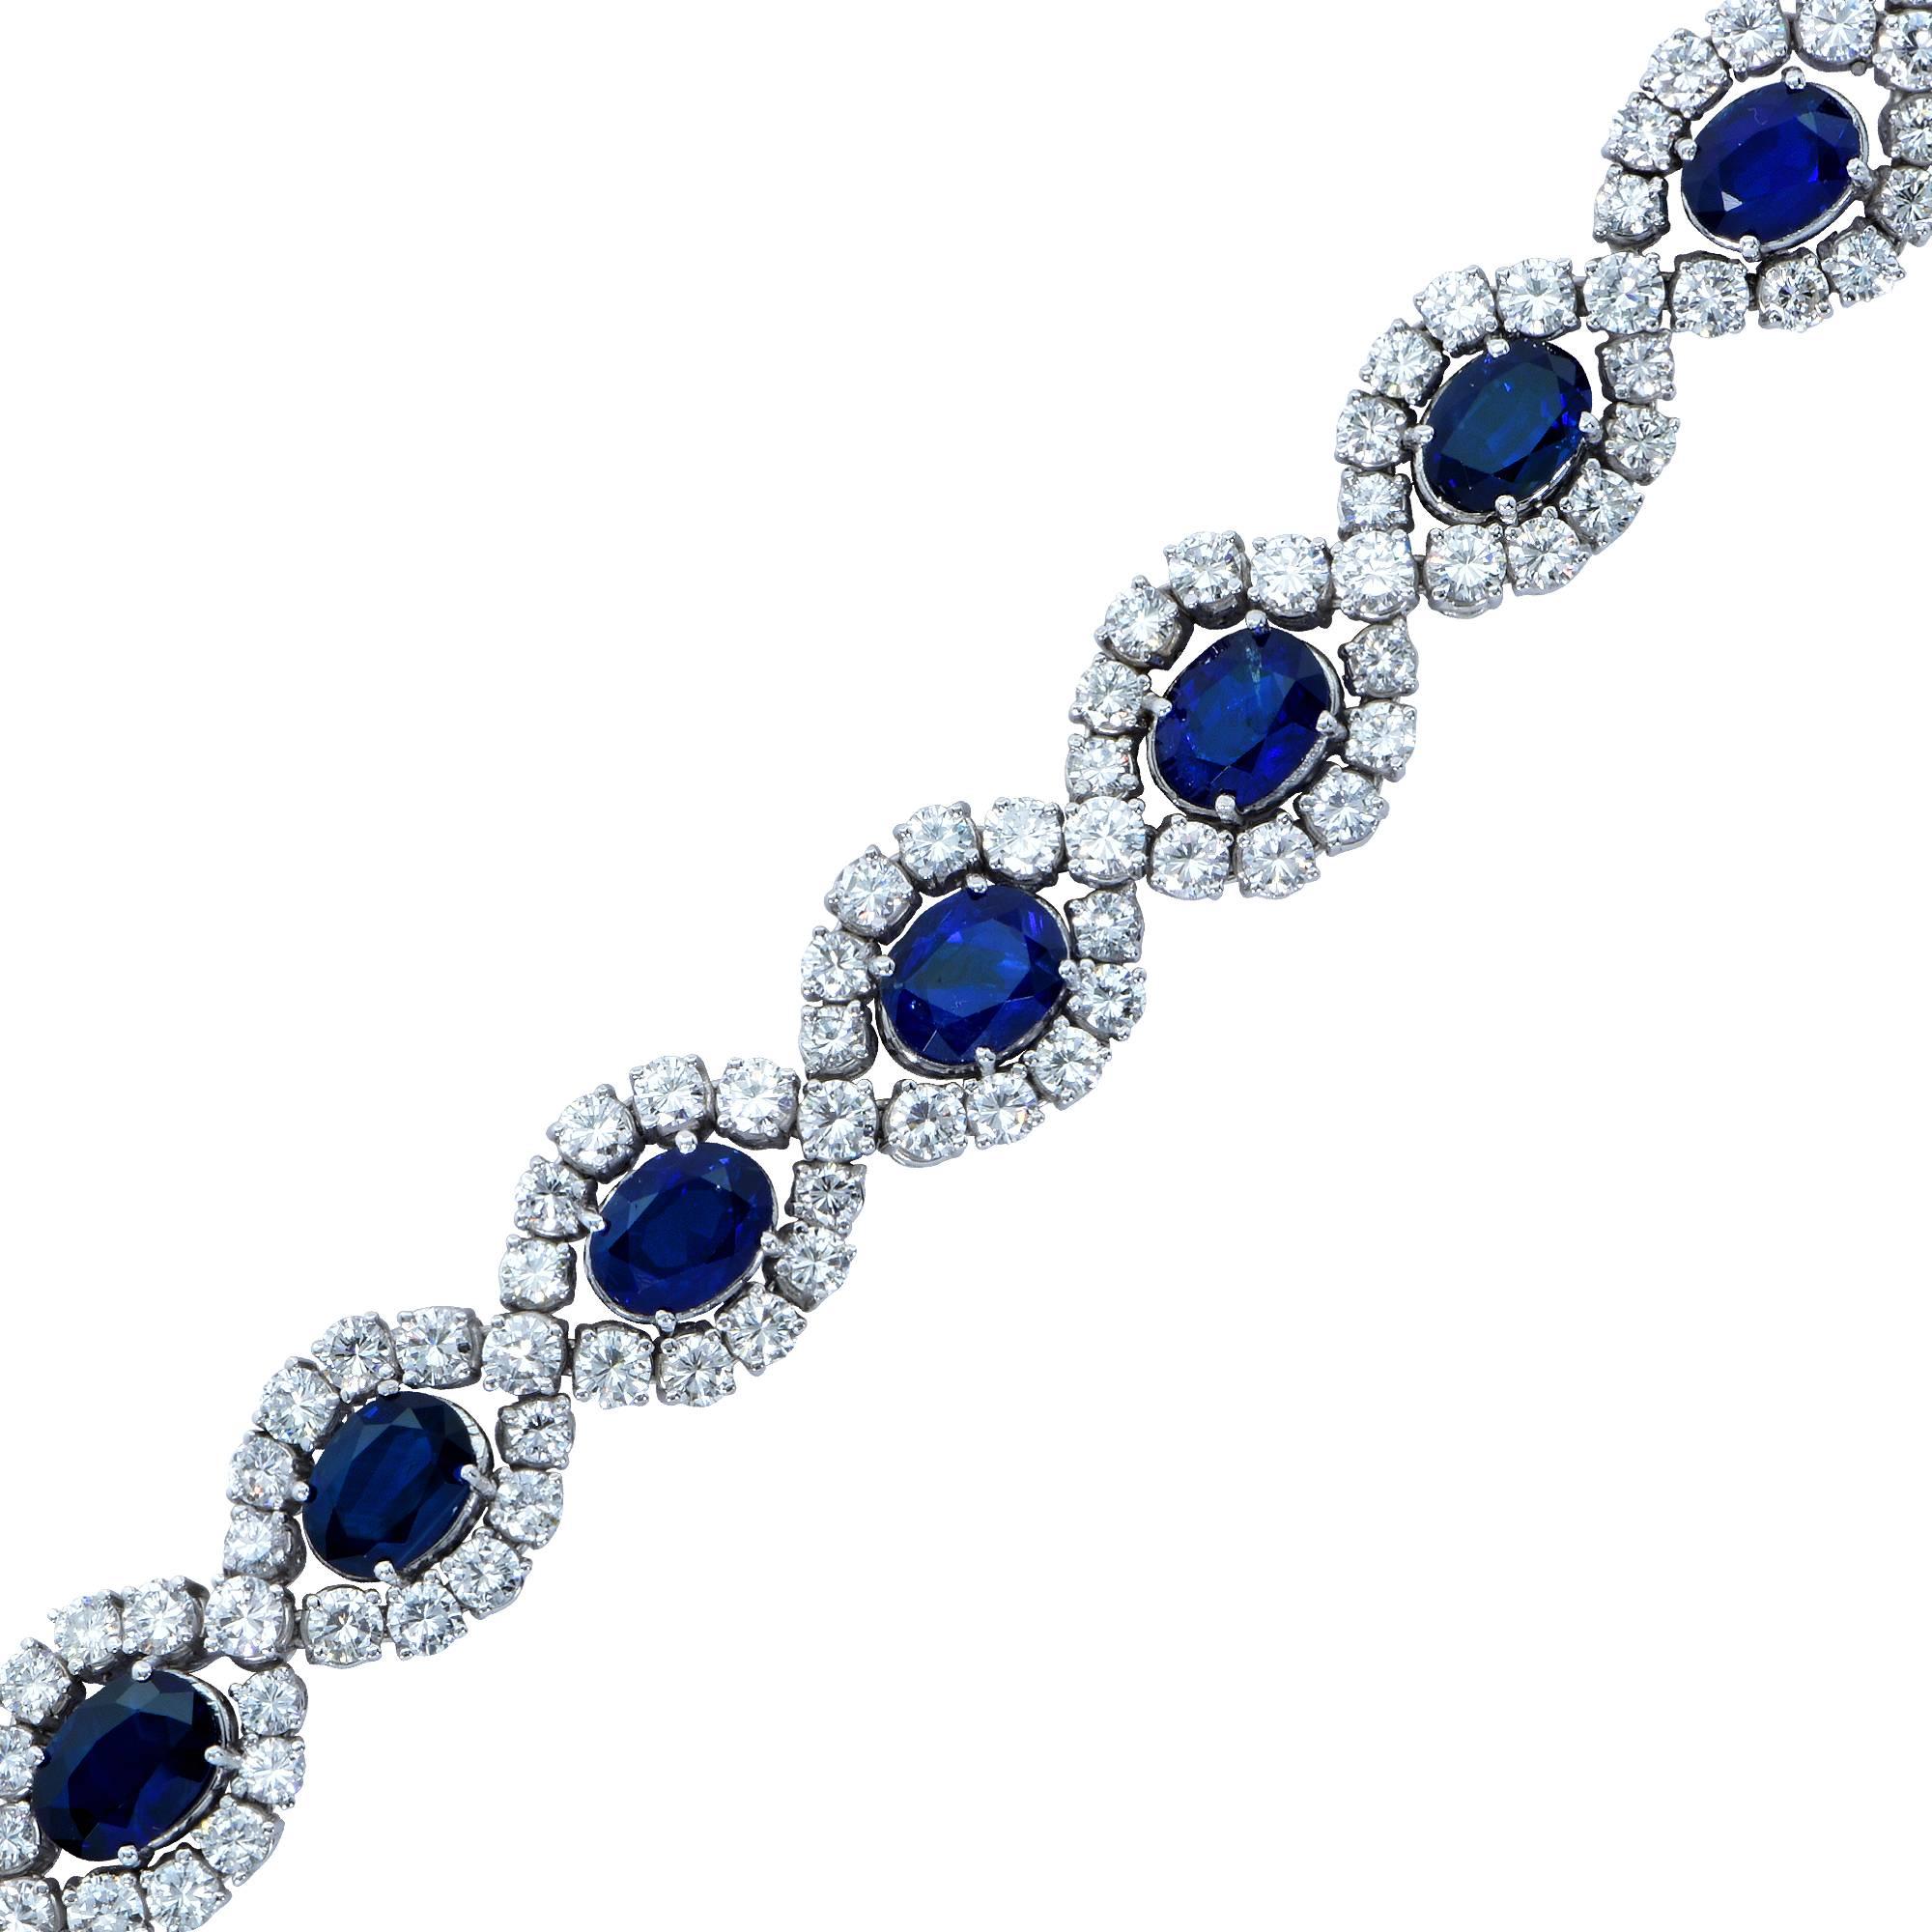 Beautiful sapphire and diamond bracelet featuring 12 oval cut blue sapphires weighing approximately 18cts total accented by 134 round brilliant cut diamonds weighing approximately 11cts total, G color VS clarity, mounted in 18k white